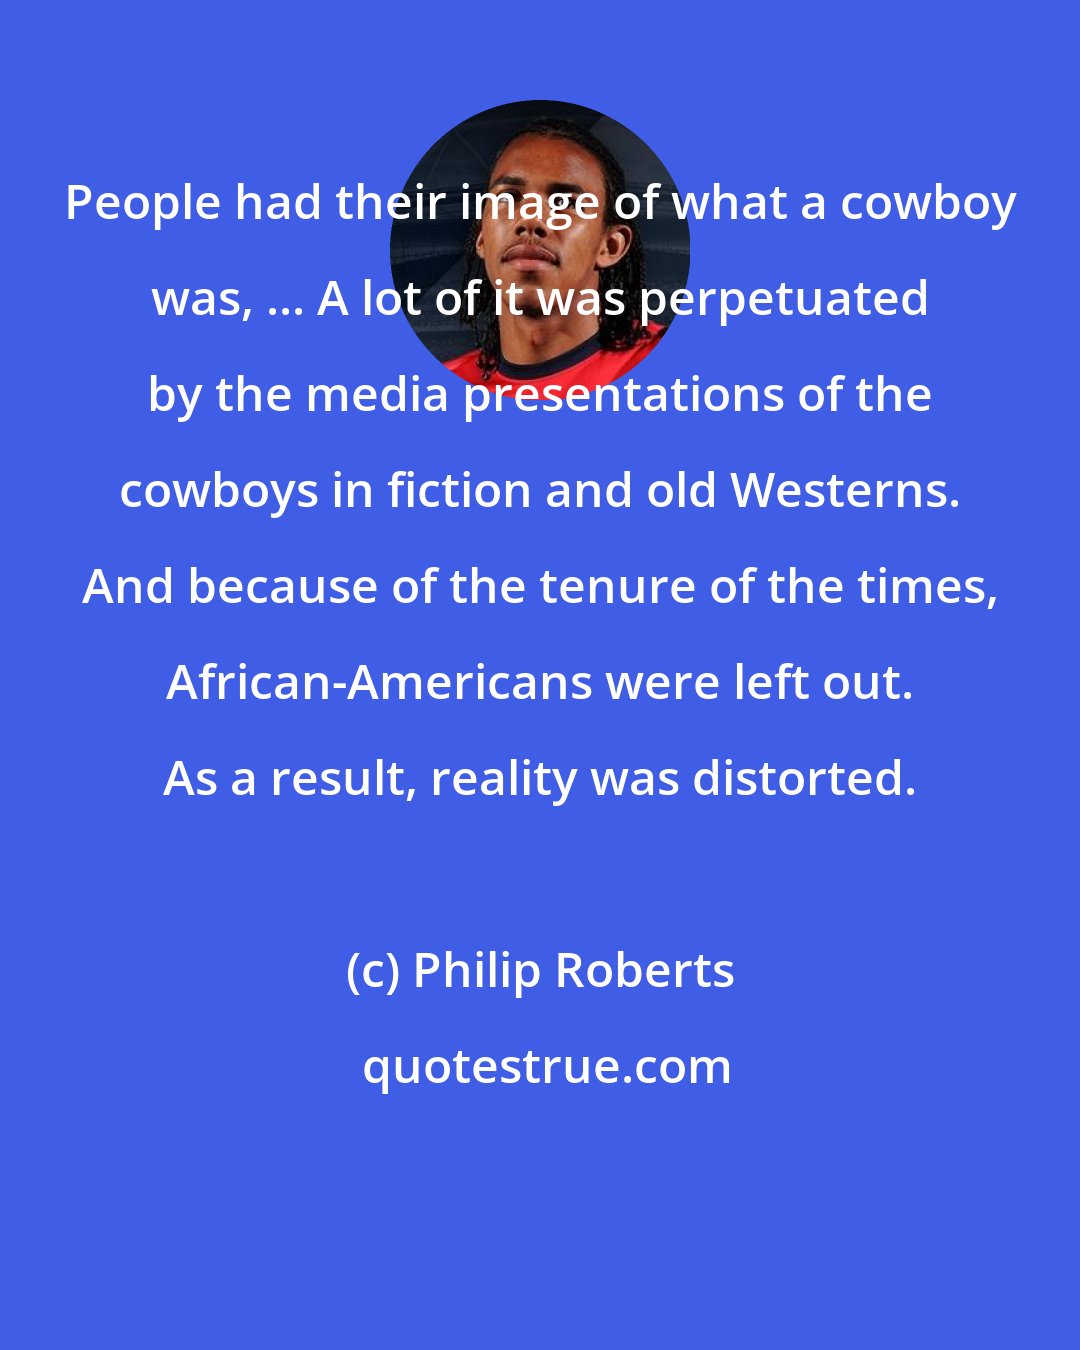 Philip Roberts: People had their image of what a cowboy was, ... A lot of it was perpetuated by the media presentations of the cowboys in fiction and old Westerns. And because of the tenure of the times, African-Americans were left out. As a result, reality was distorted.